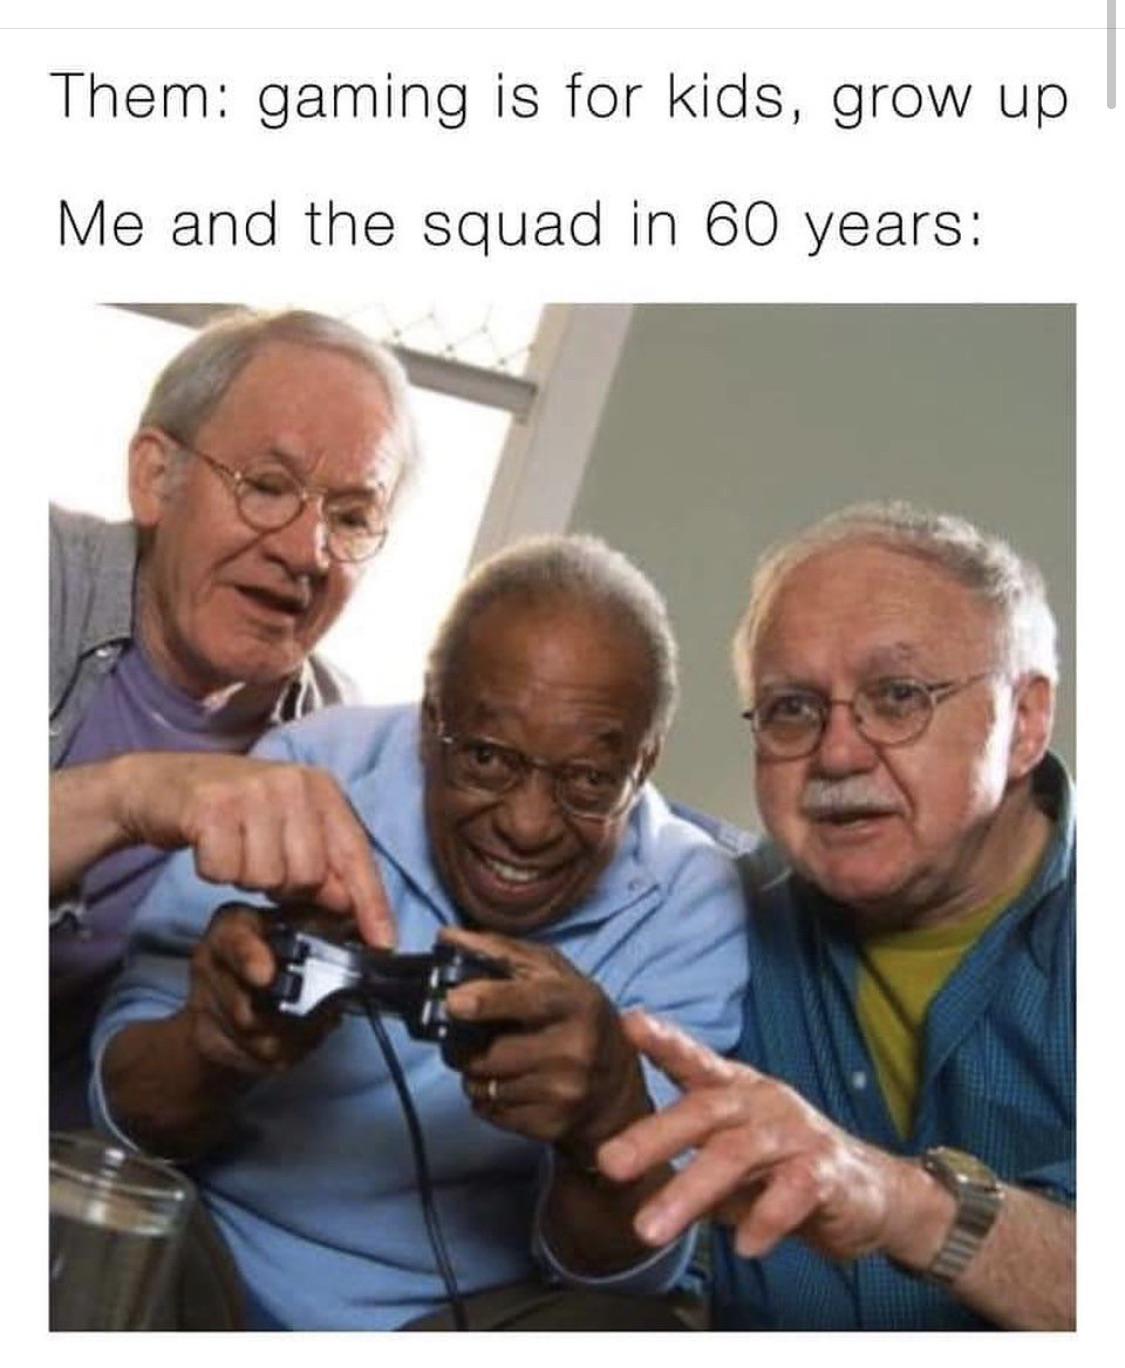 funny pictures - me and the boys meme gta - Them gaming is for kids, grow up Me and the squad in 60 years